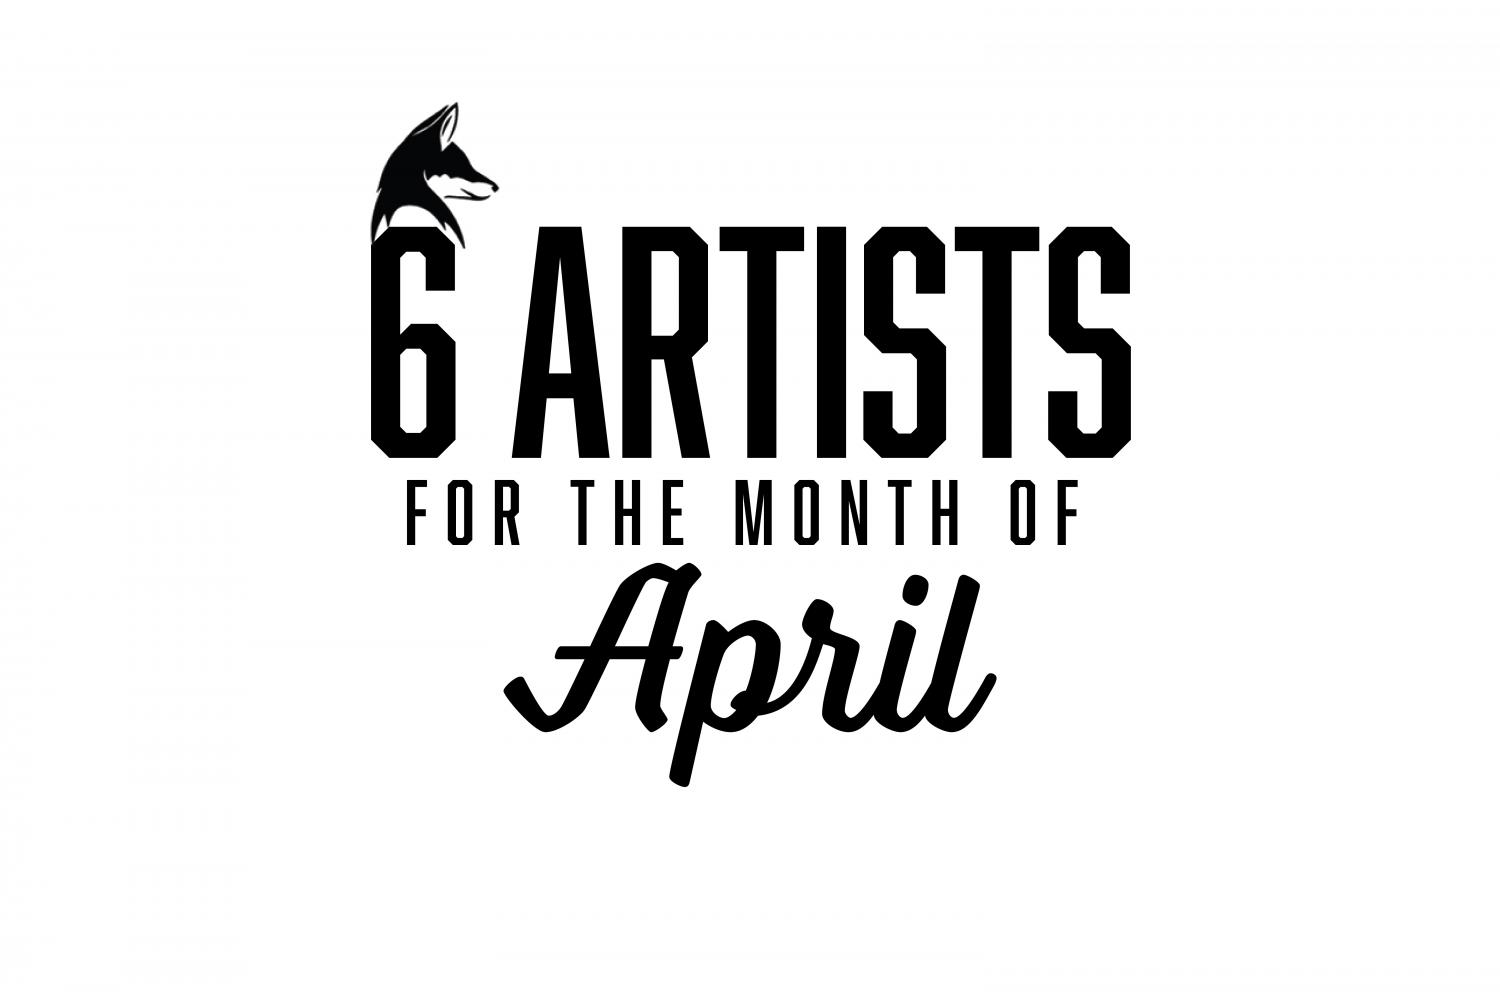 Six+Artists+You+Should+Be+Listening+To%3A+April+2021+EDITION